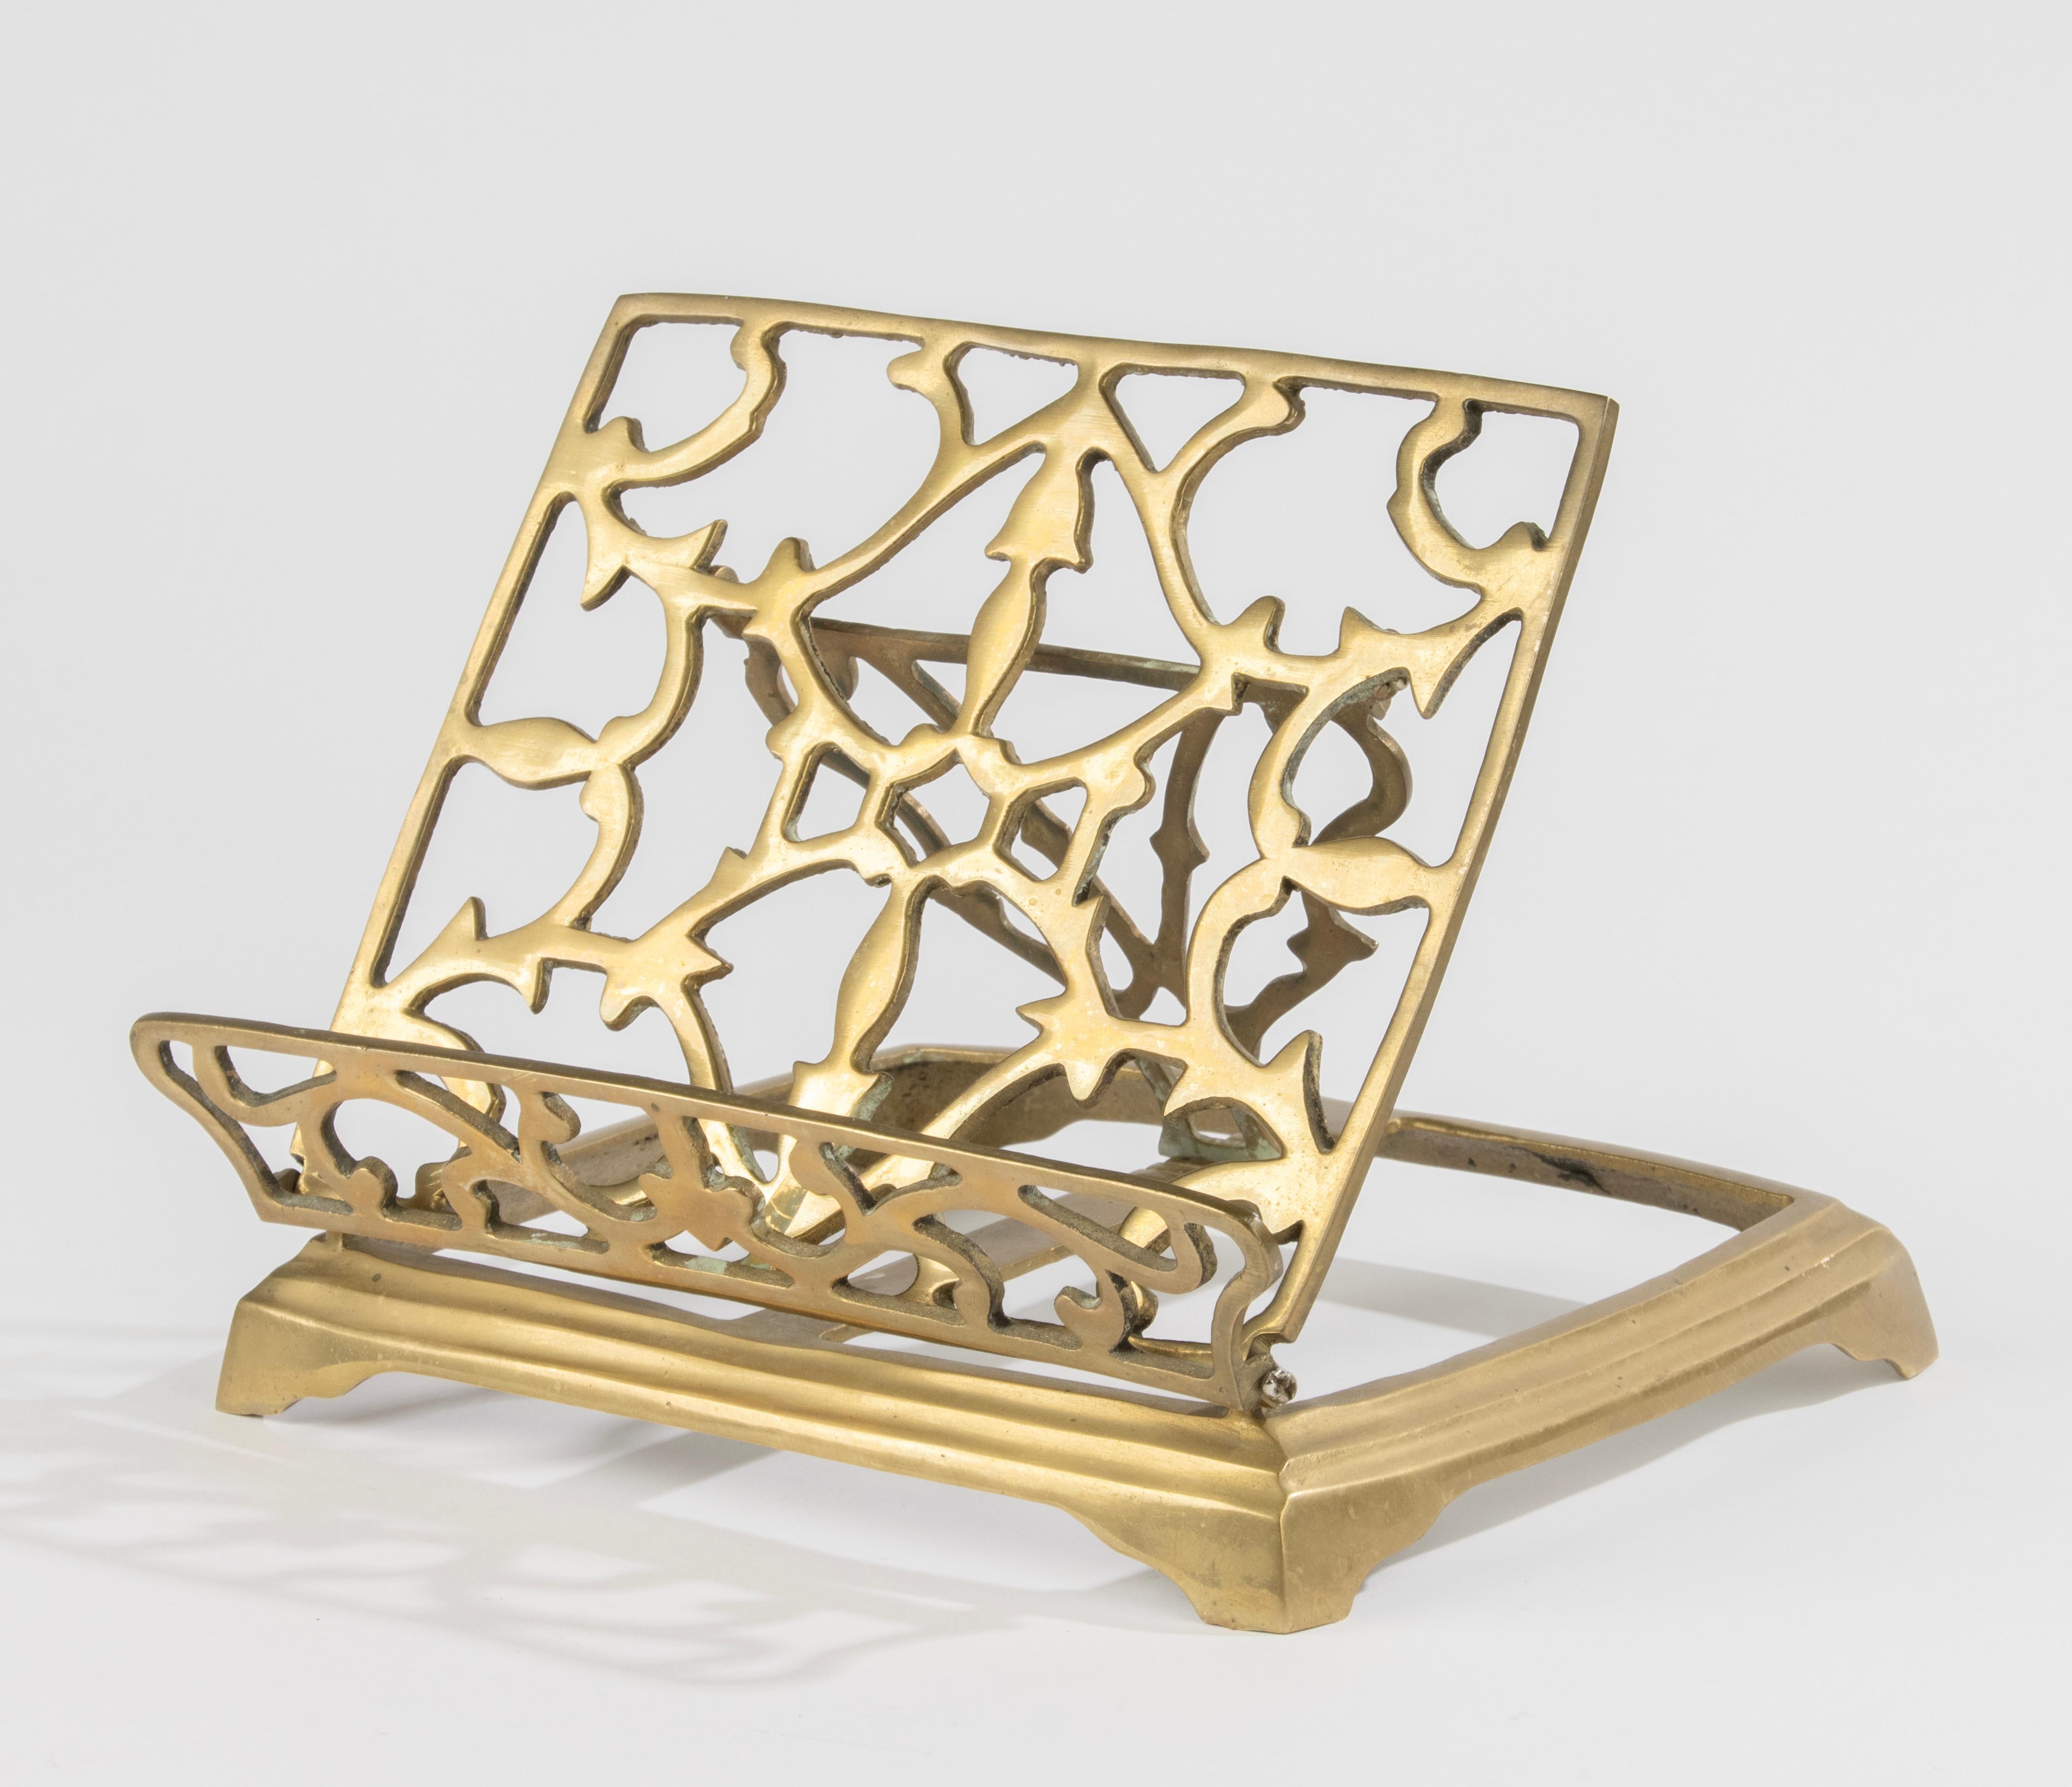 A beautiful antique brass book stand. Adjustable angle.  
Estimated date and origin: France, circa 1910. 
Dimensions: 24 x 21 cm and 19 cm tall. 
The book stand is in good condition. 
Free shipping worldwide. 